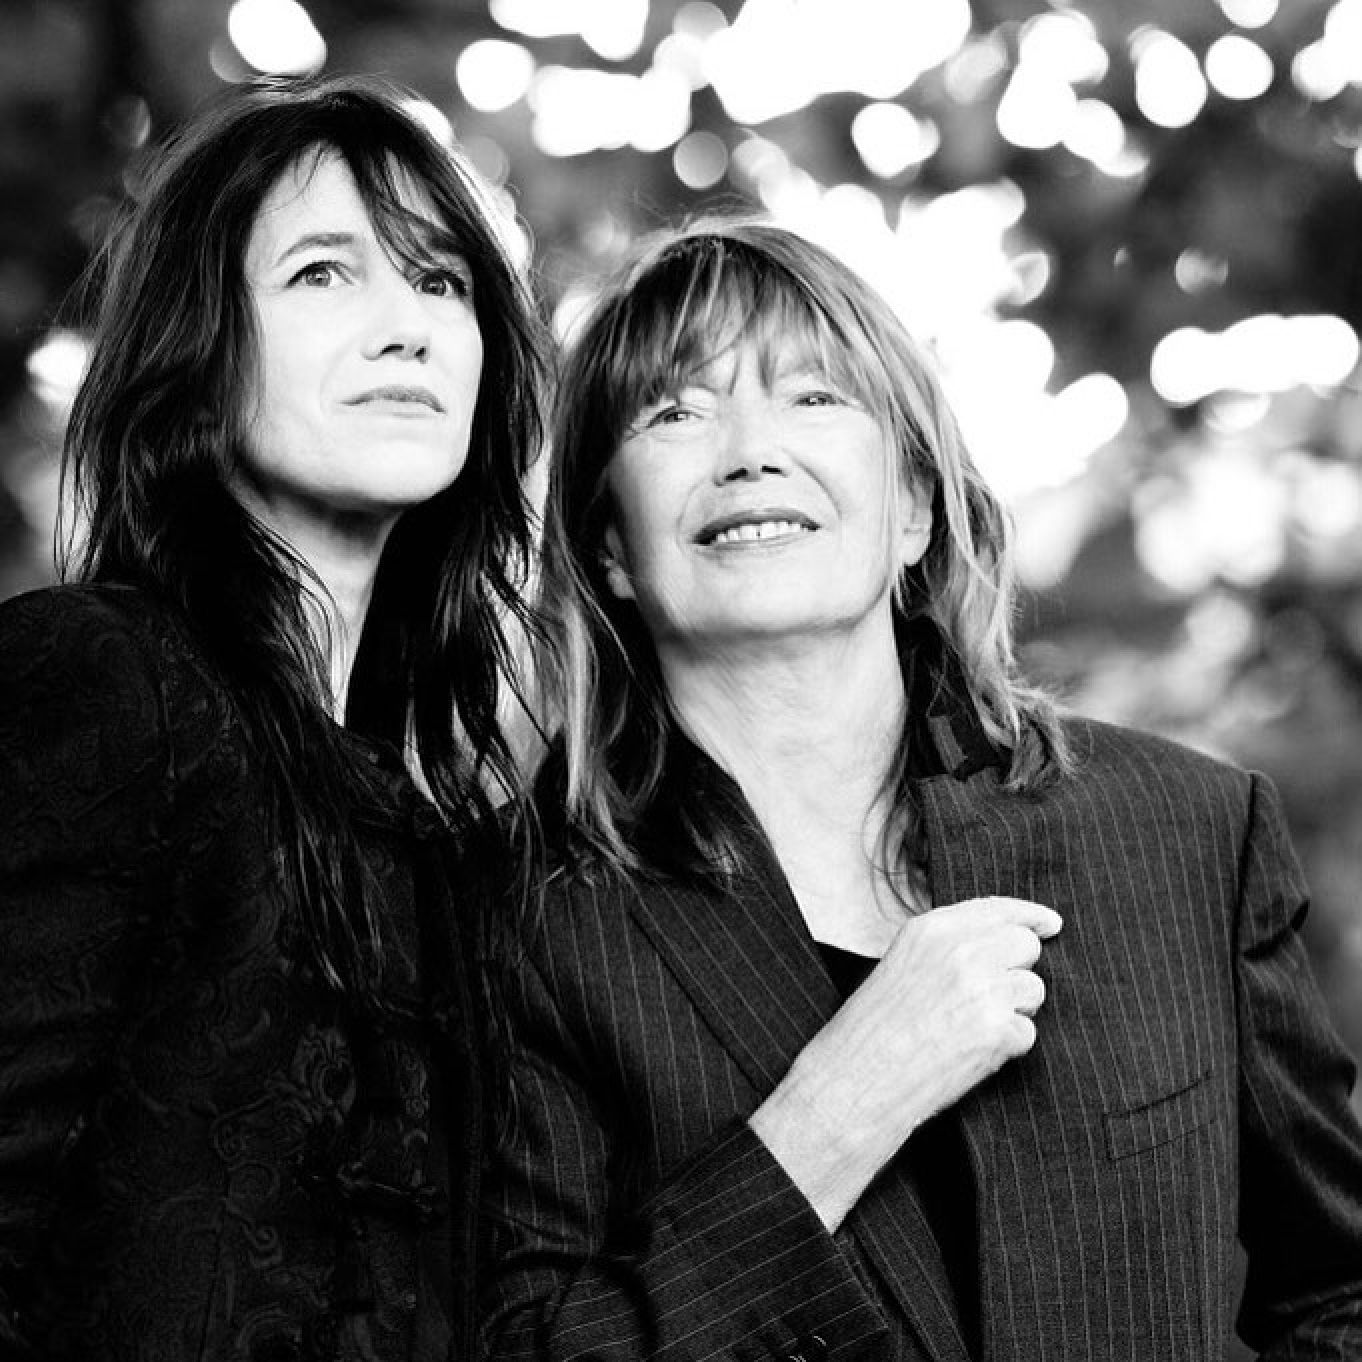 Jane Birkin's famous daughters Charlotte and Lou, from her